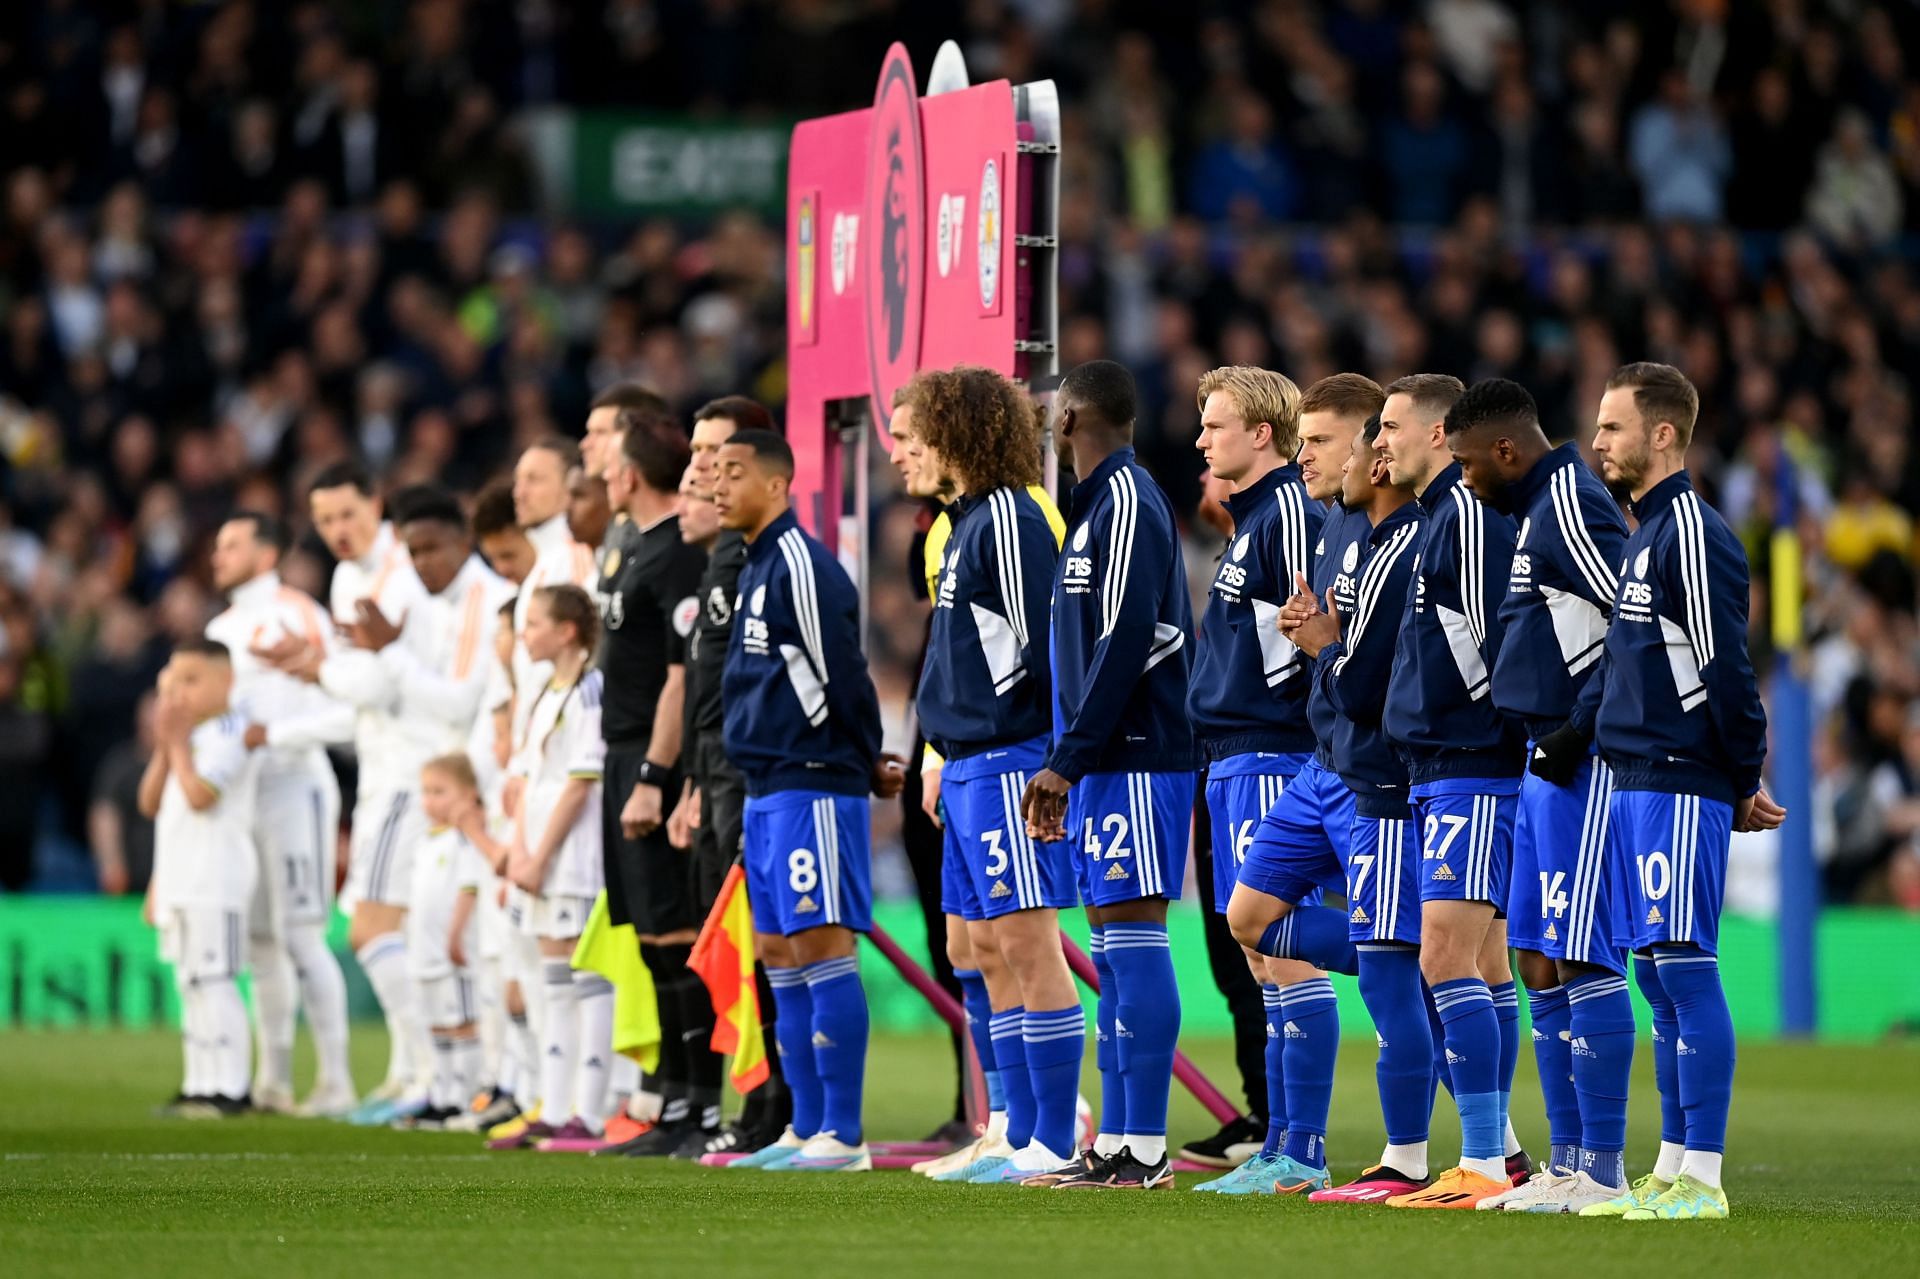 Leicester City and Leeds United are in contention for 17tth place of the Premier League table